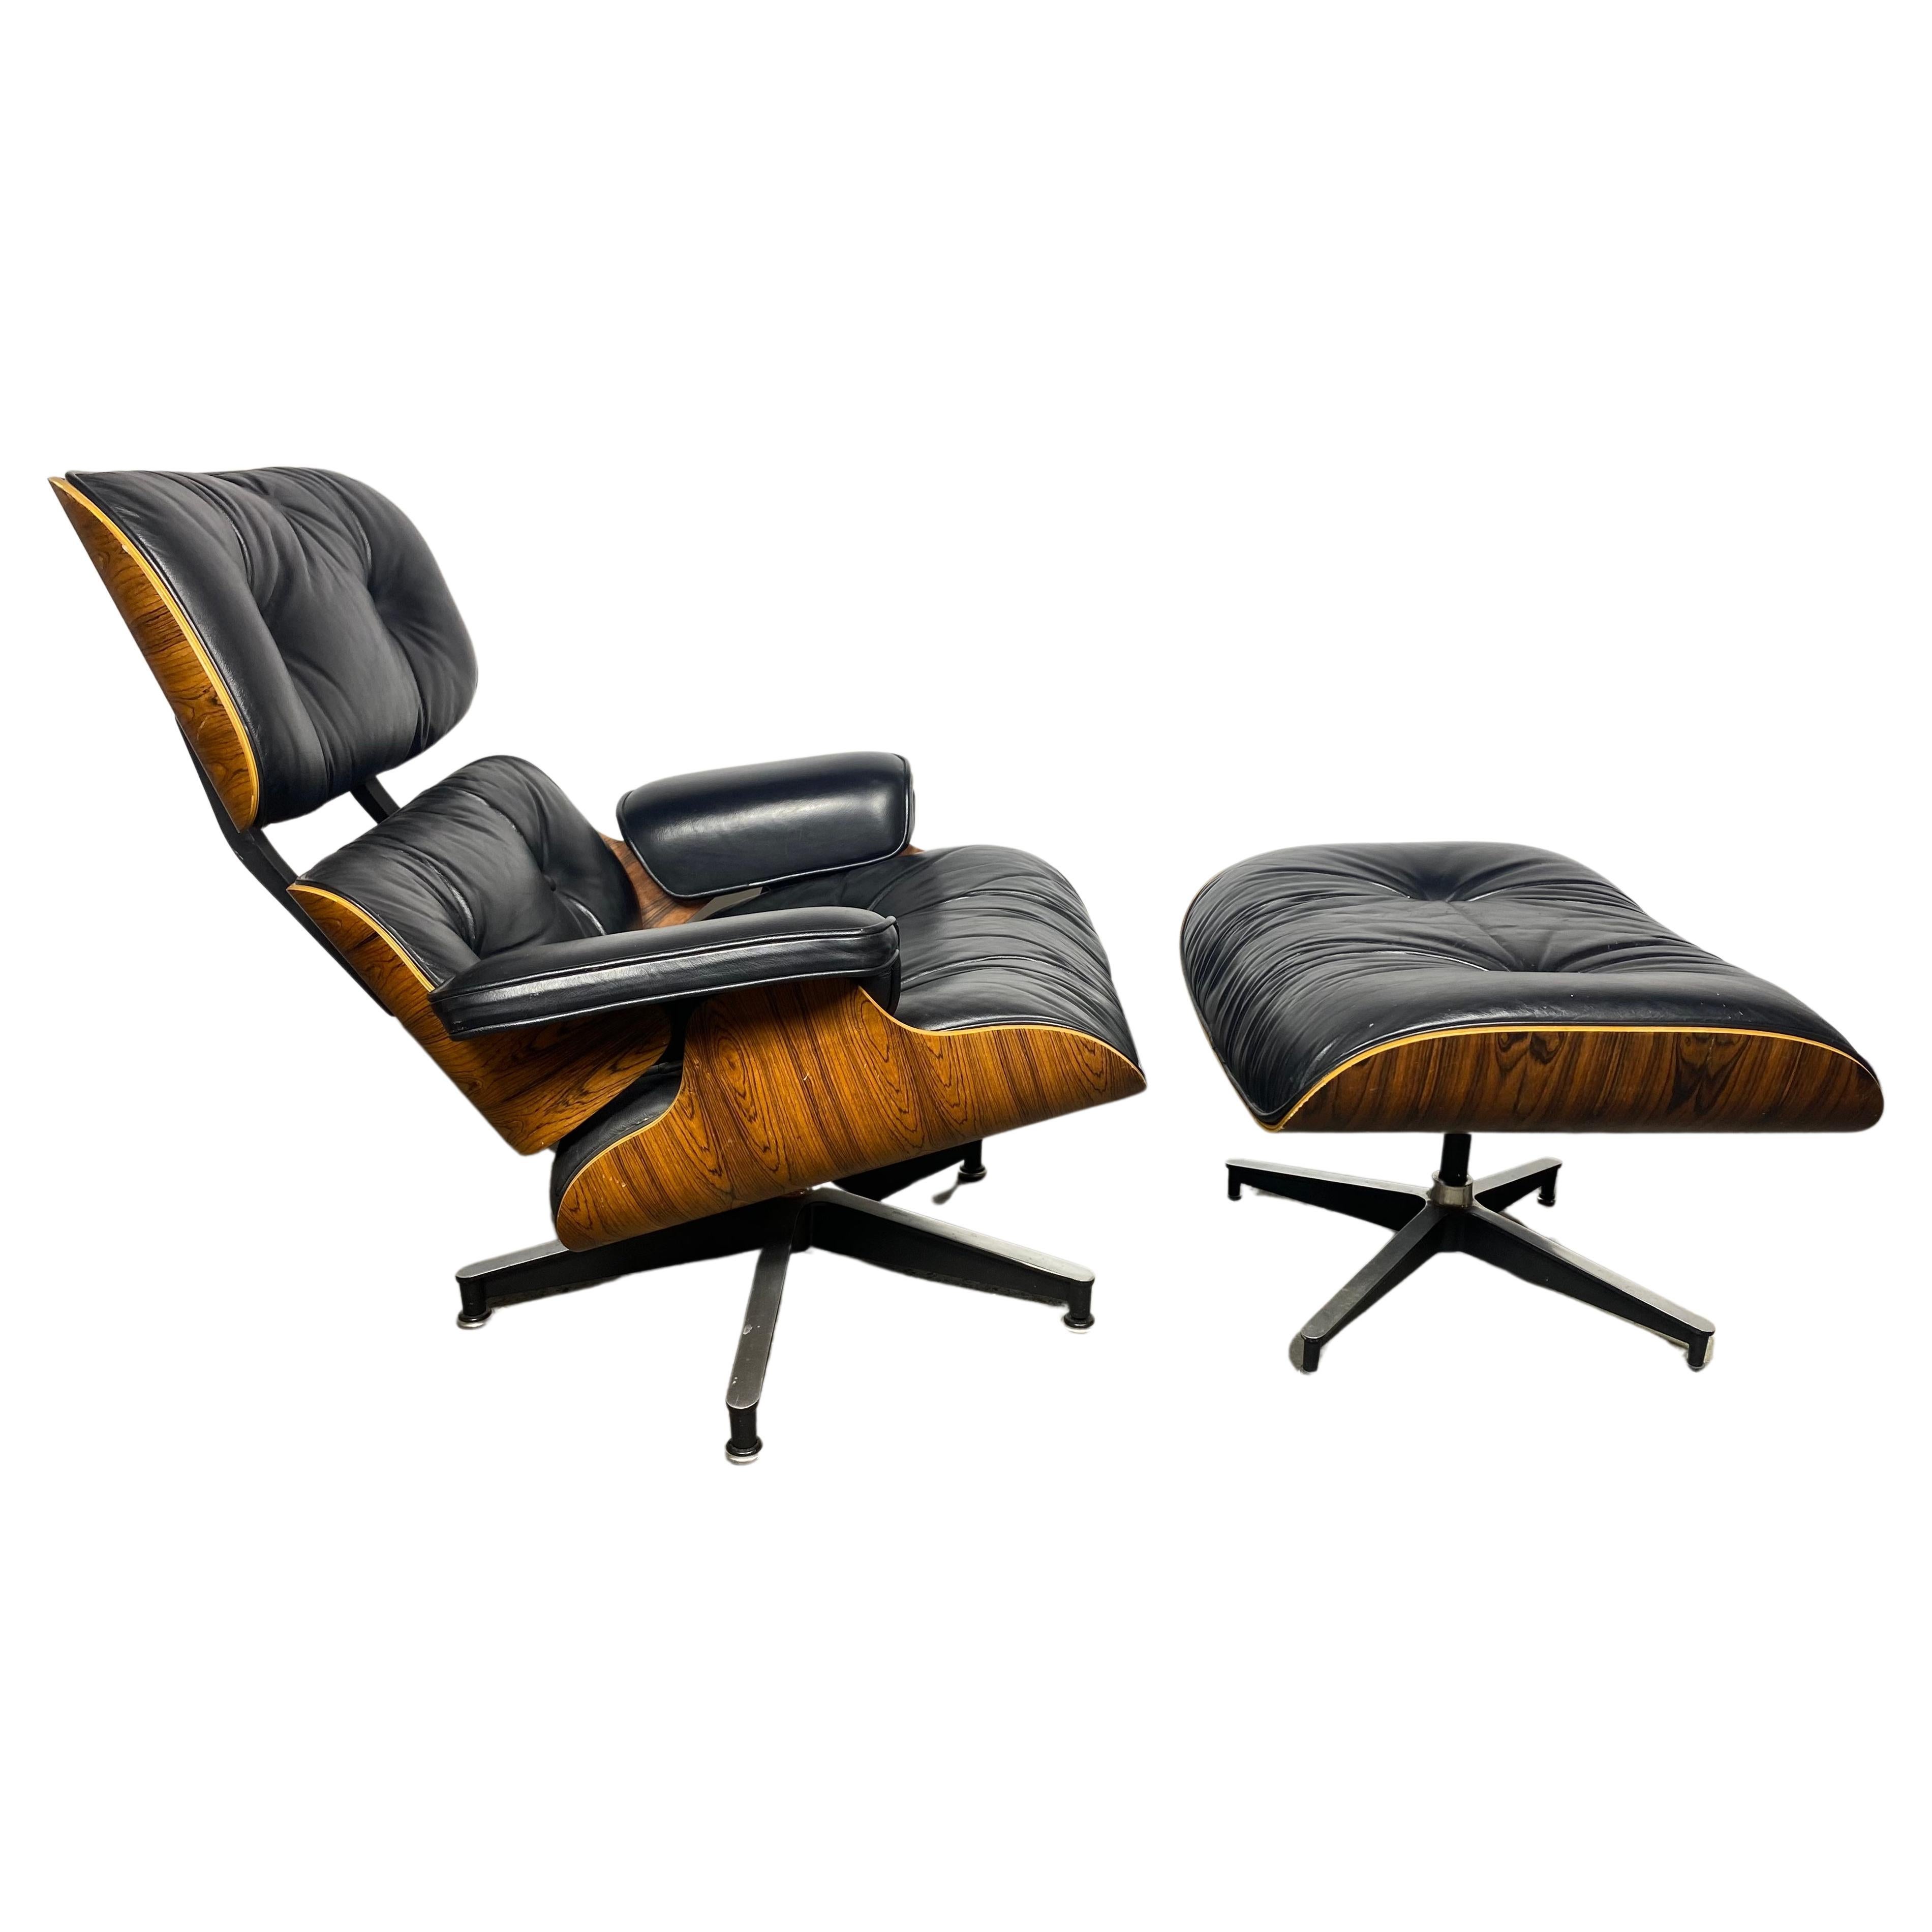 CLassic Brazilian Rosewood and Leather Eames Lounge Chair & Ott Herman Miller